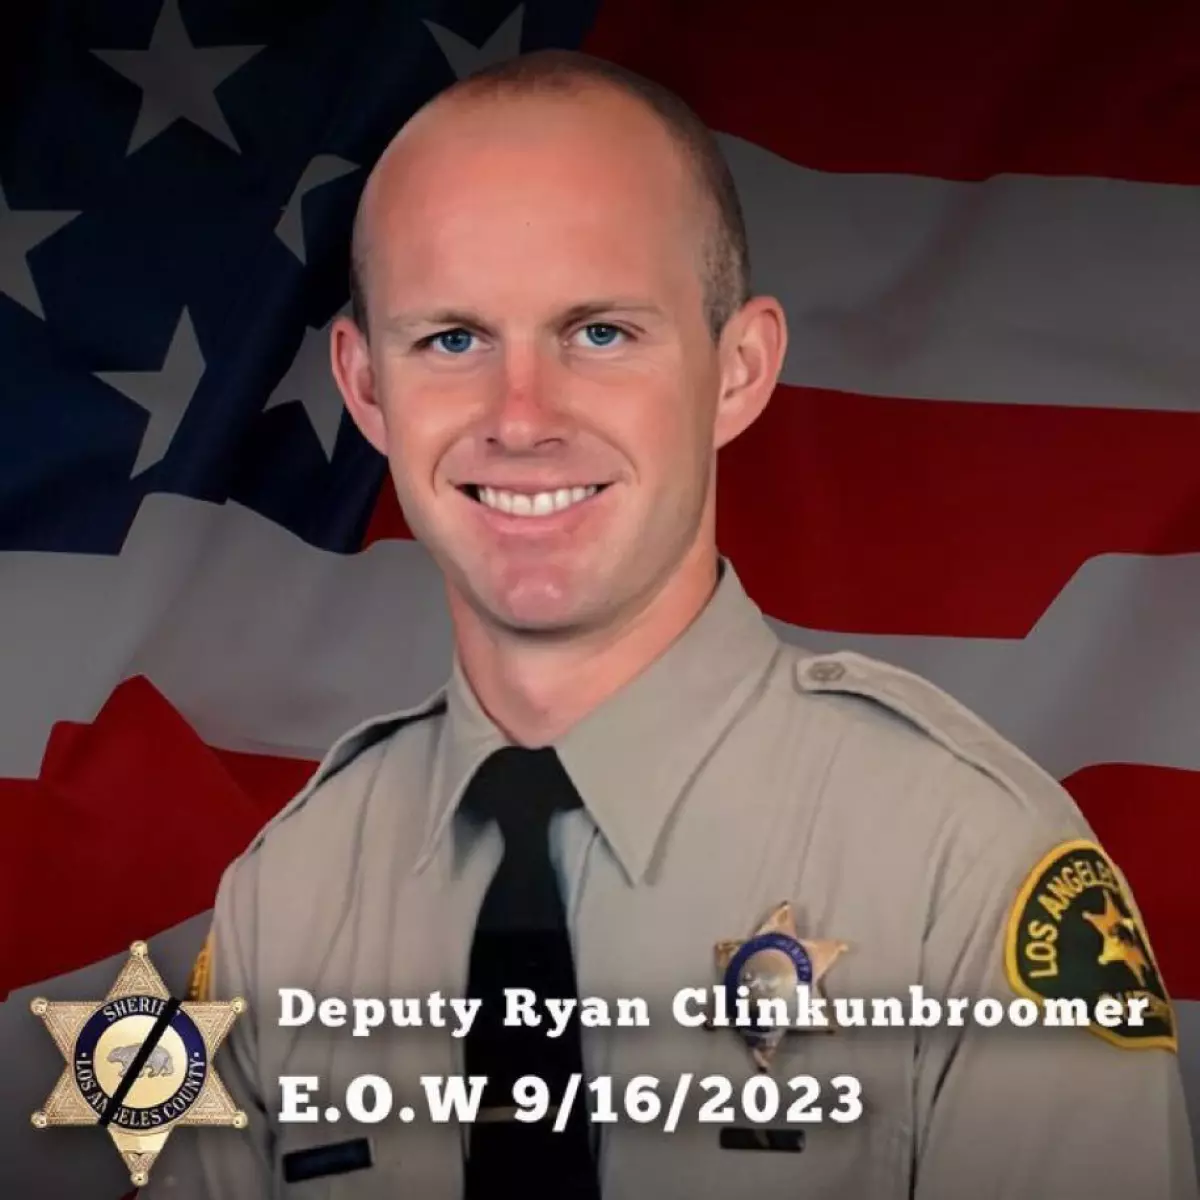 Deputy Ryan Clinkunbroomer joined the sheriff’s department eight years ago and came from a family of law enforcement. (Los Angeles County Sheriff’s Department)